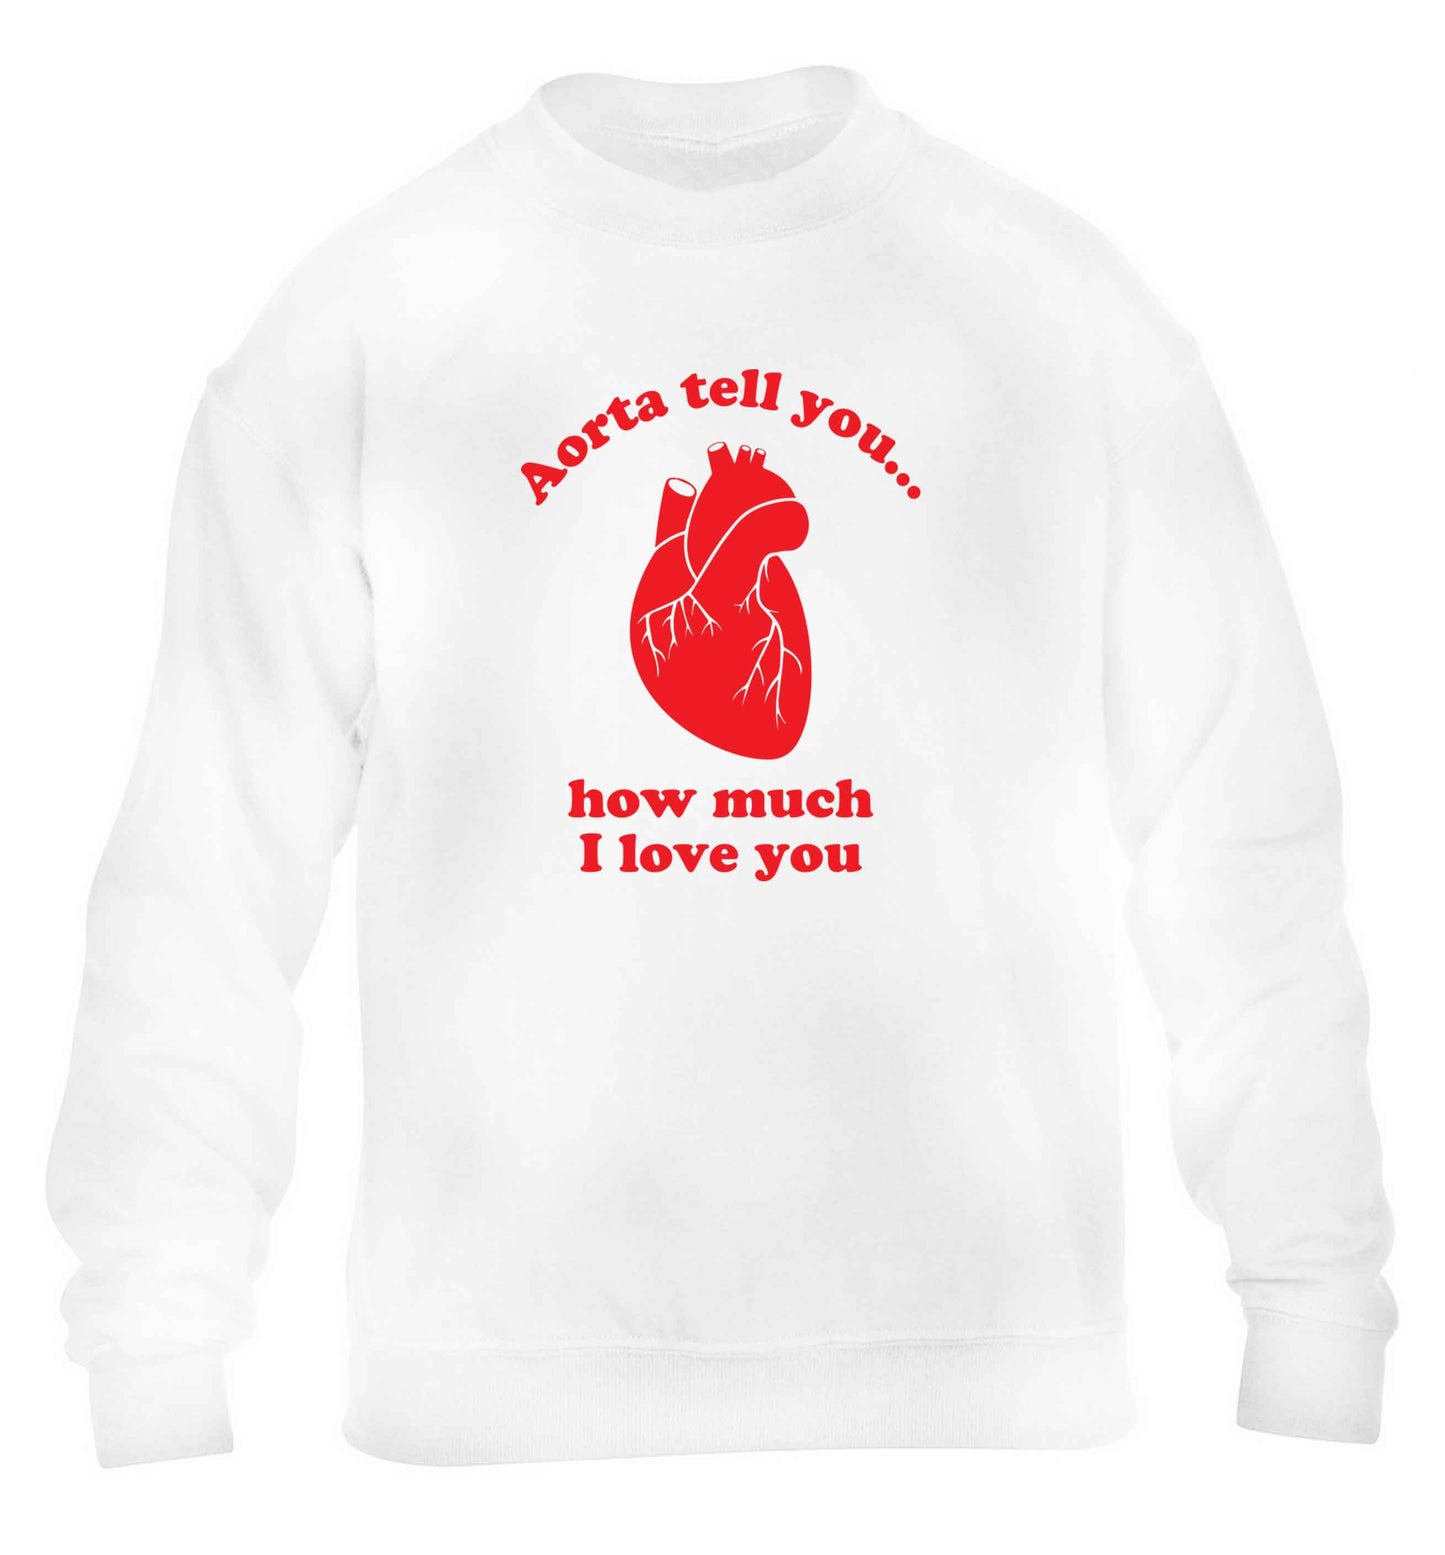 Aorta tell you how much I love you children's white sweater 12-13 Years